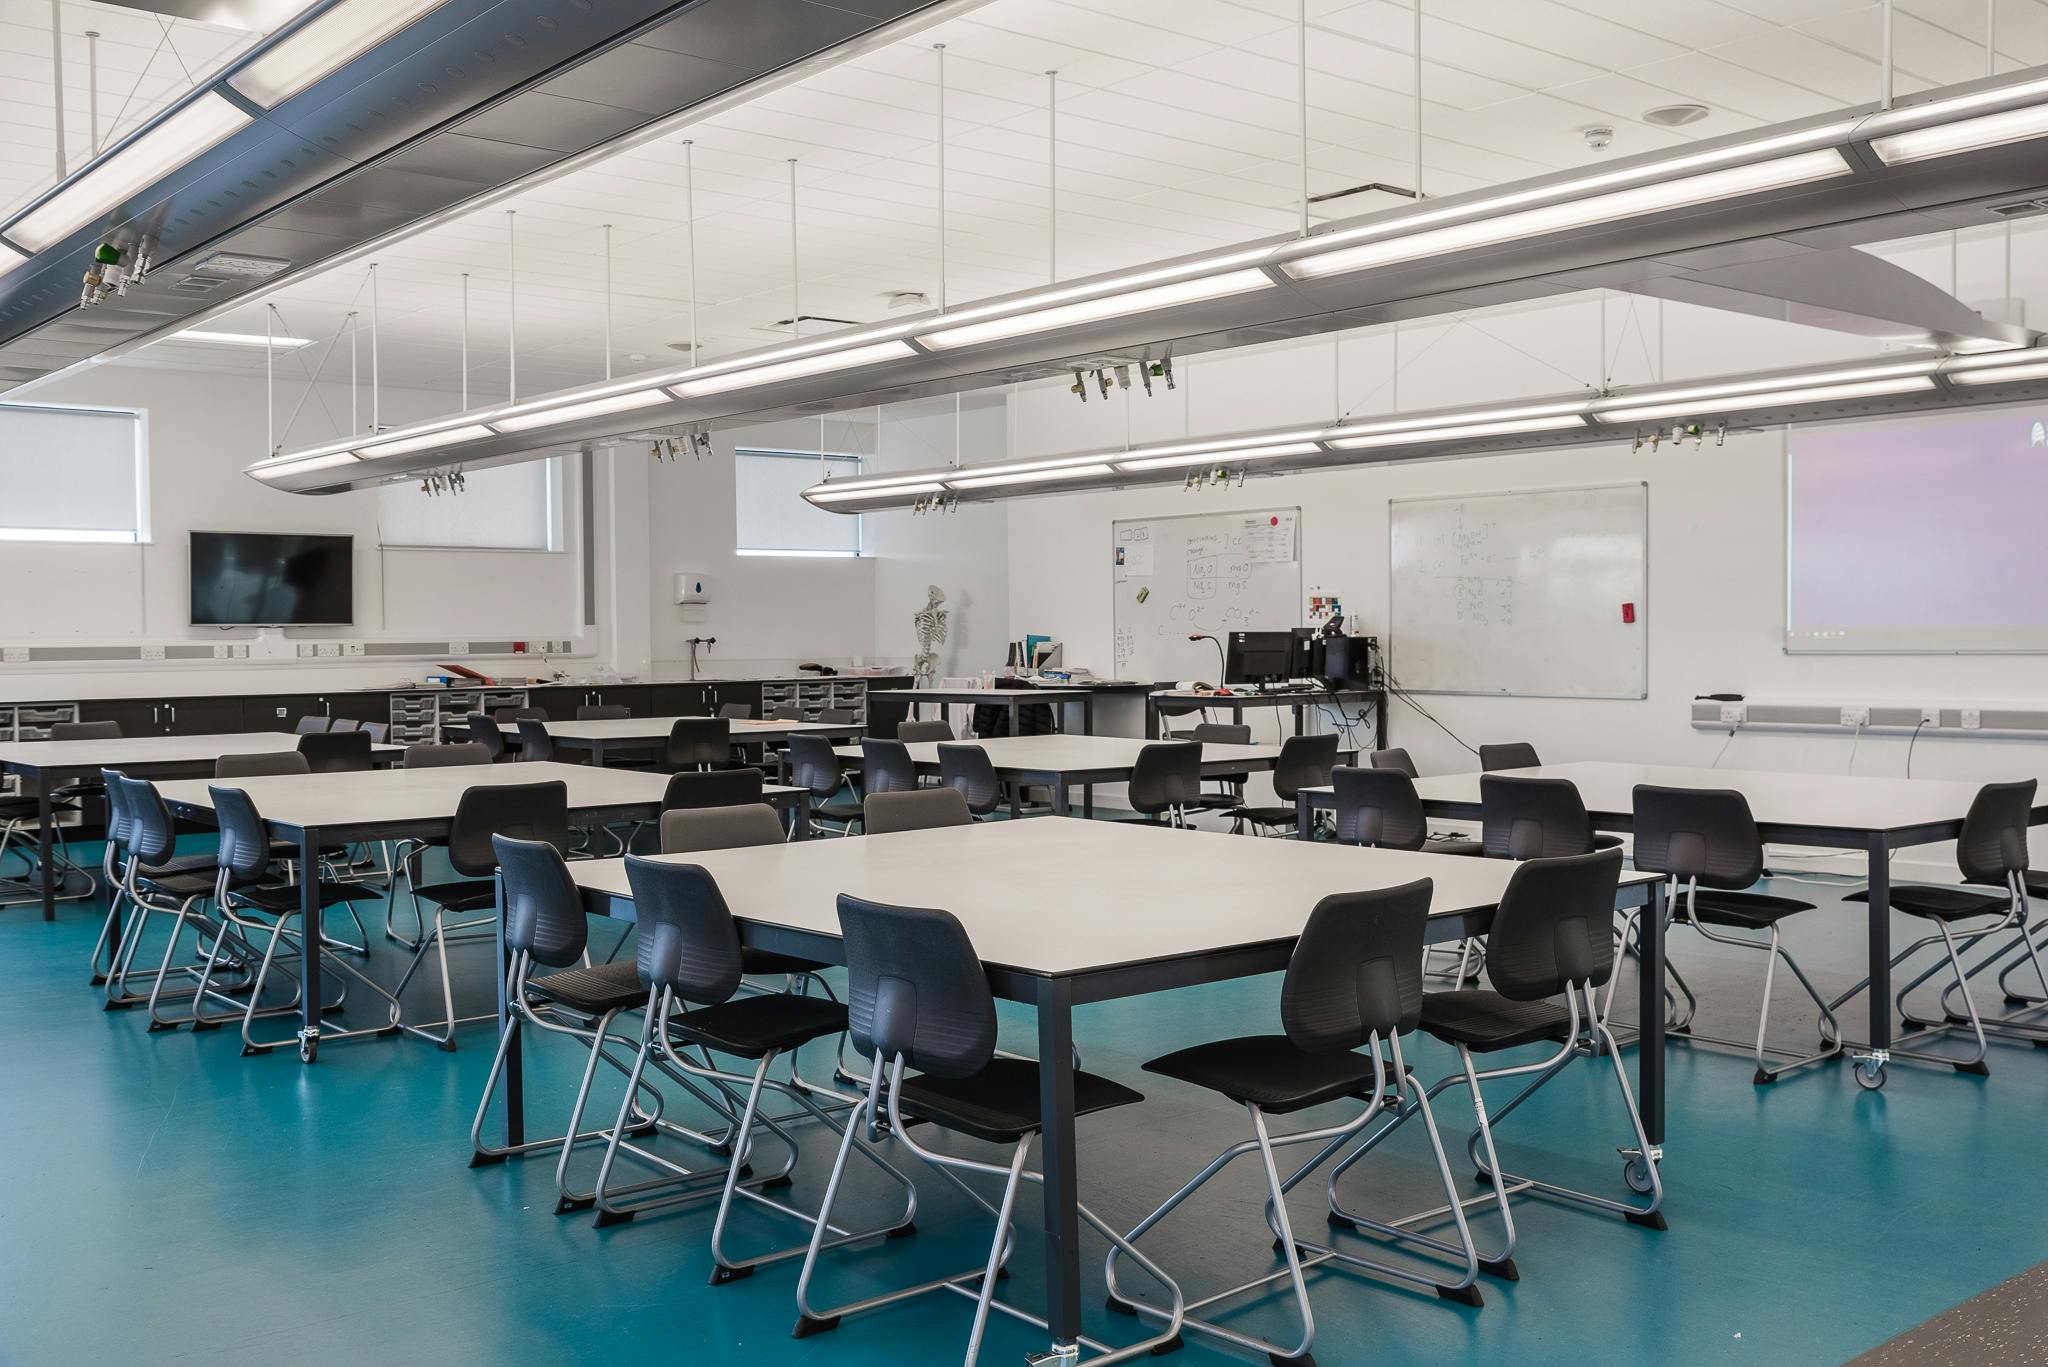 London Academy of Excellence Tottenham - Science classroom / Laboratory image 3